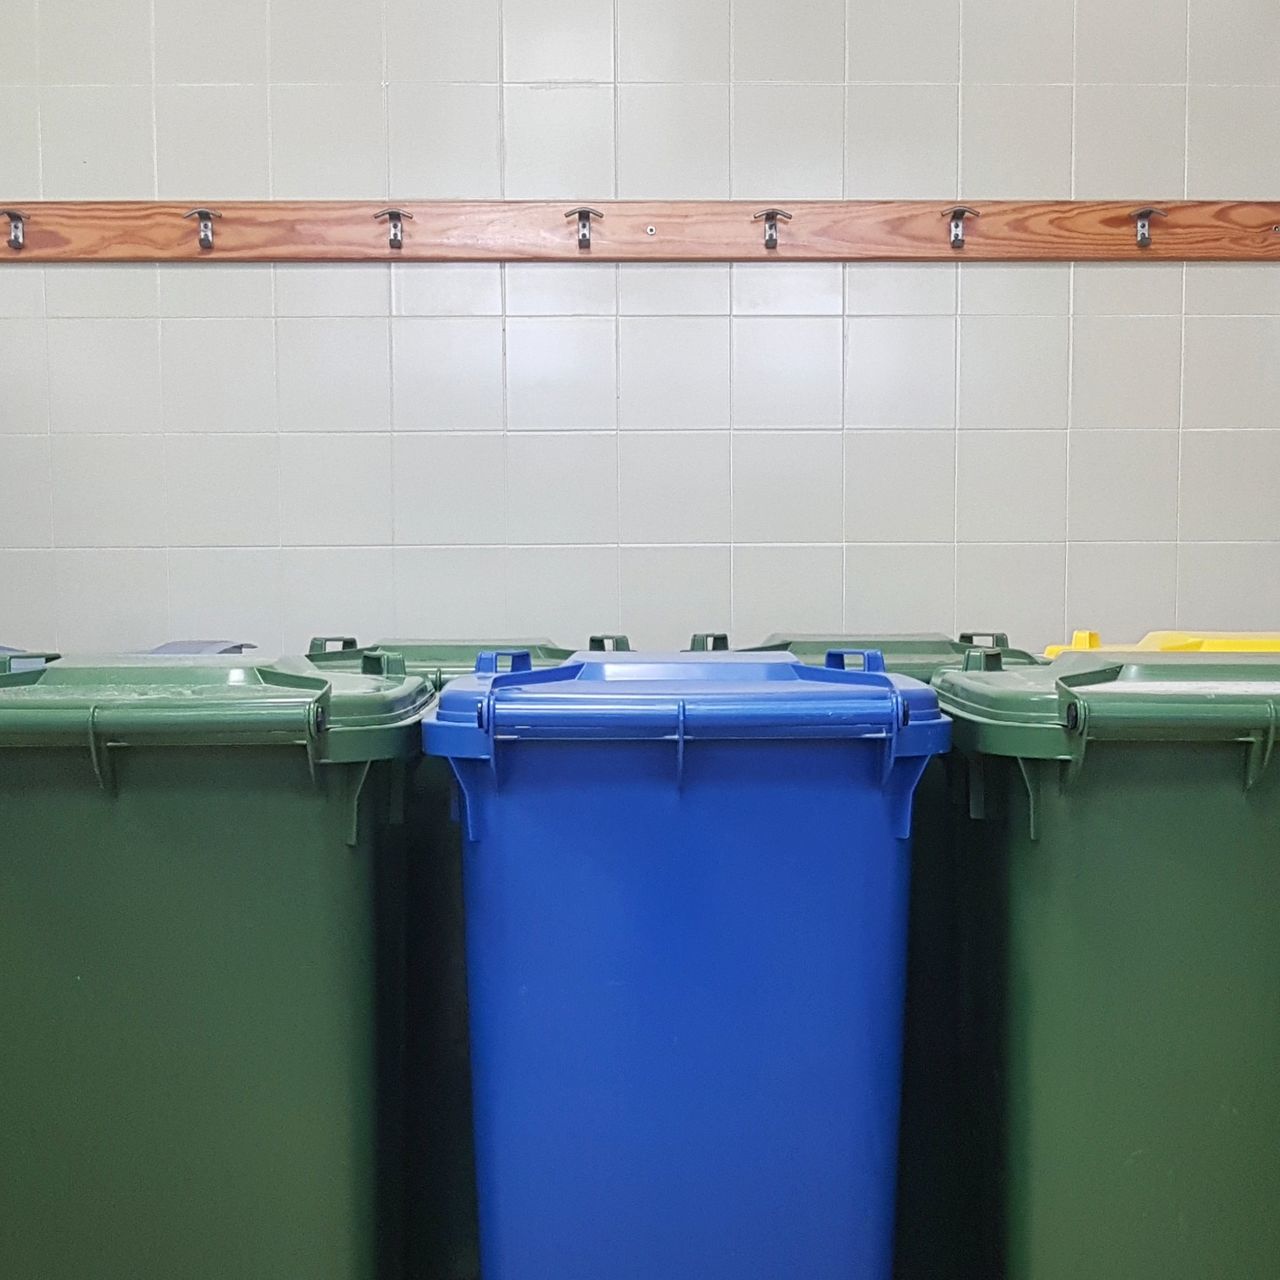 indoors, no people, hygiene, room, garbage bin, waste container, blue, recycling, environmental issues, plastic, domestic room, flooring, environmental conservation, recycling bin, green